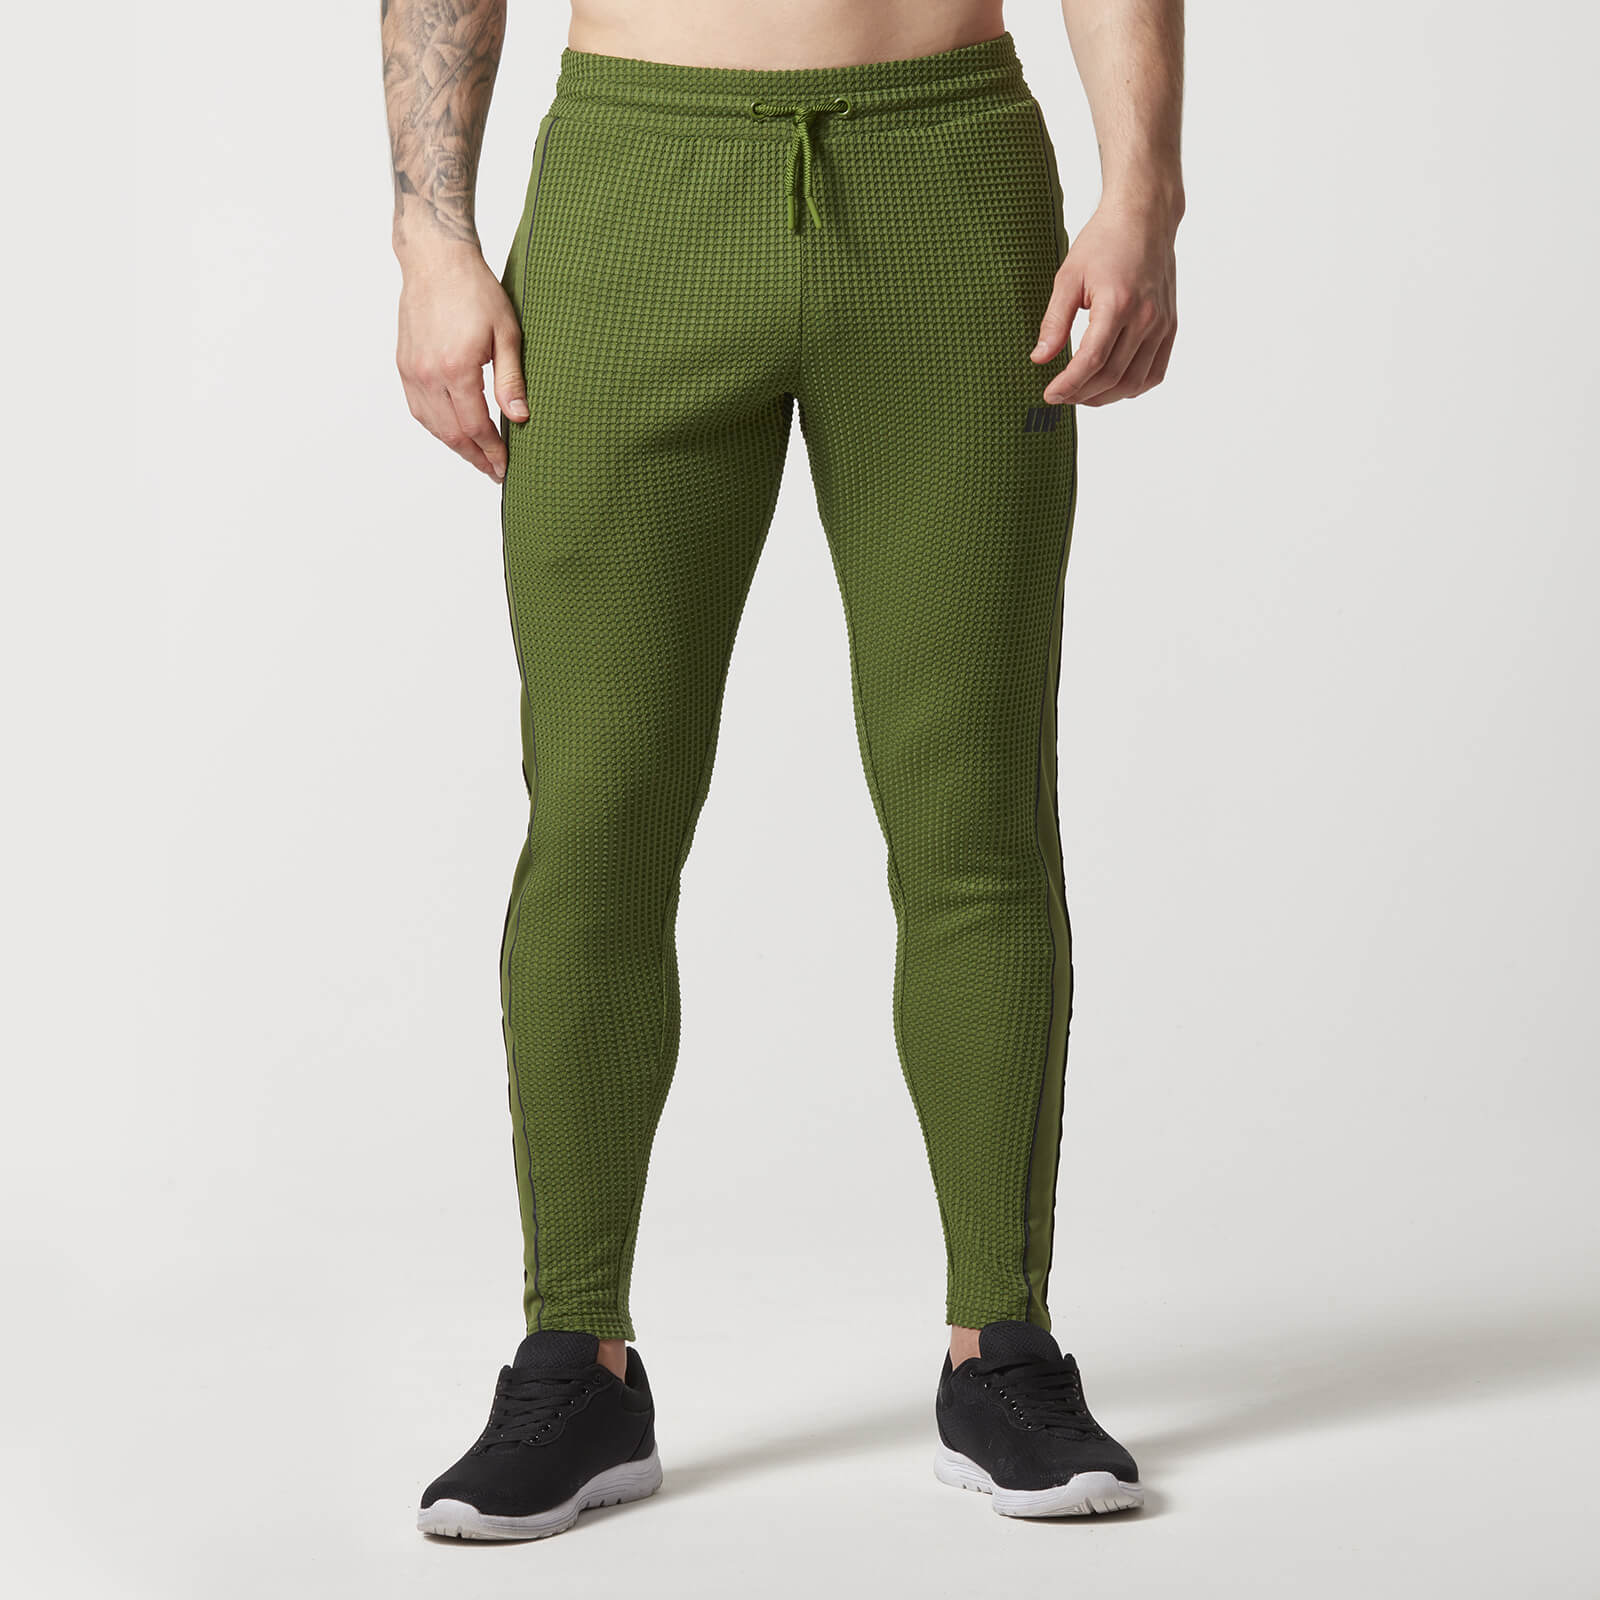 Myprotein Reflective Joggers